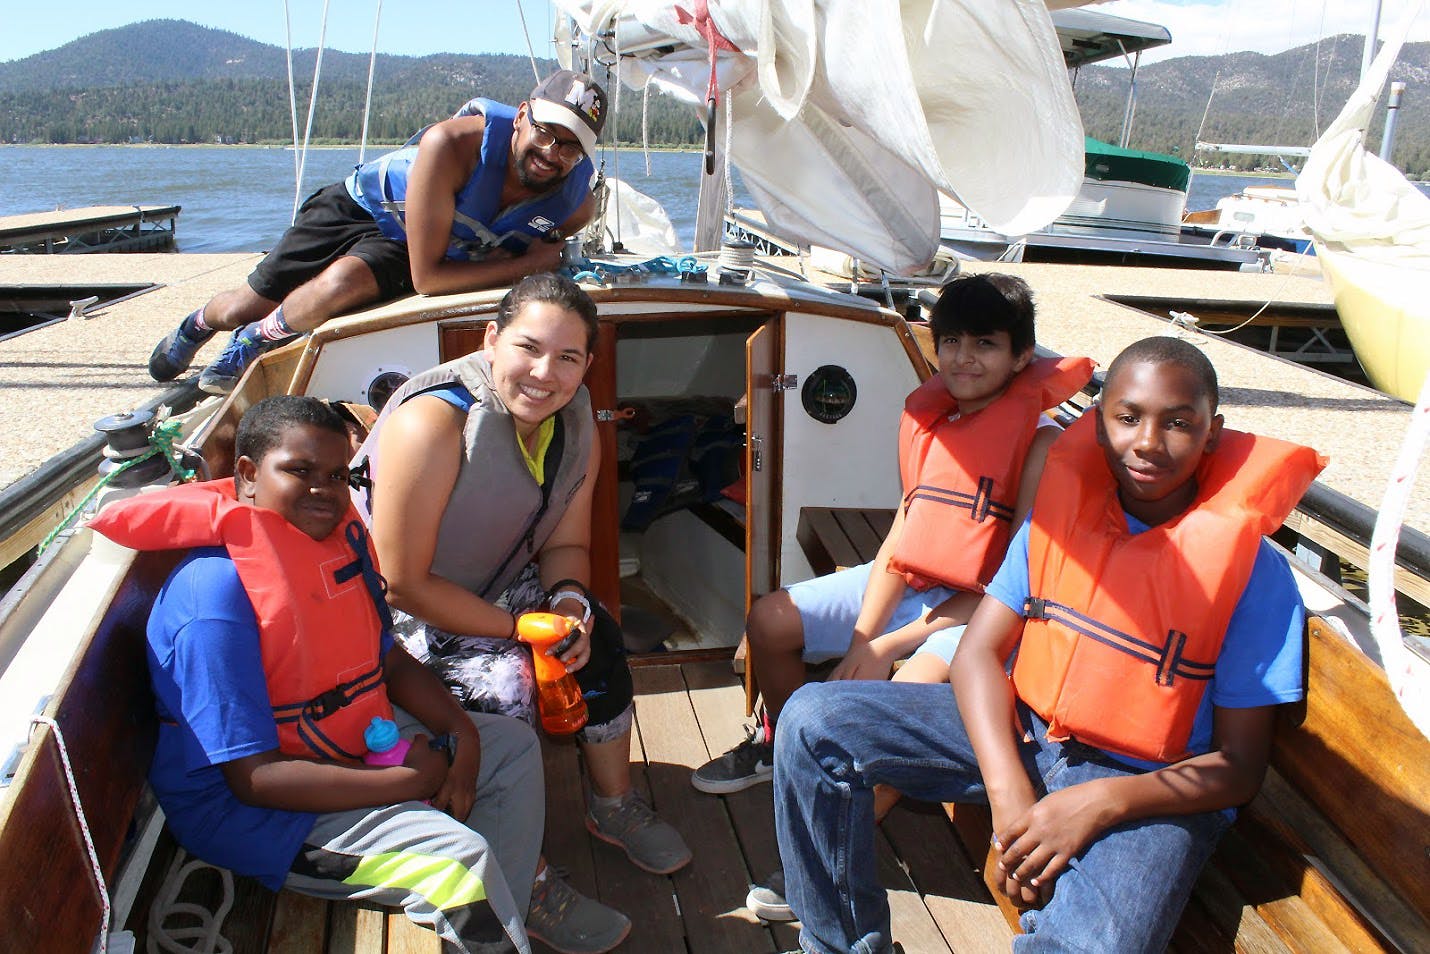 UniCamp counselors Hugo Vega and Lauren Phinney enjoy sailing with young campers on Big Bear Lake. 